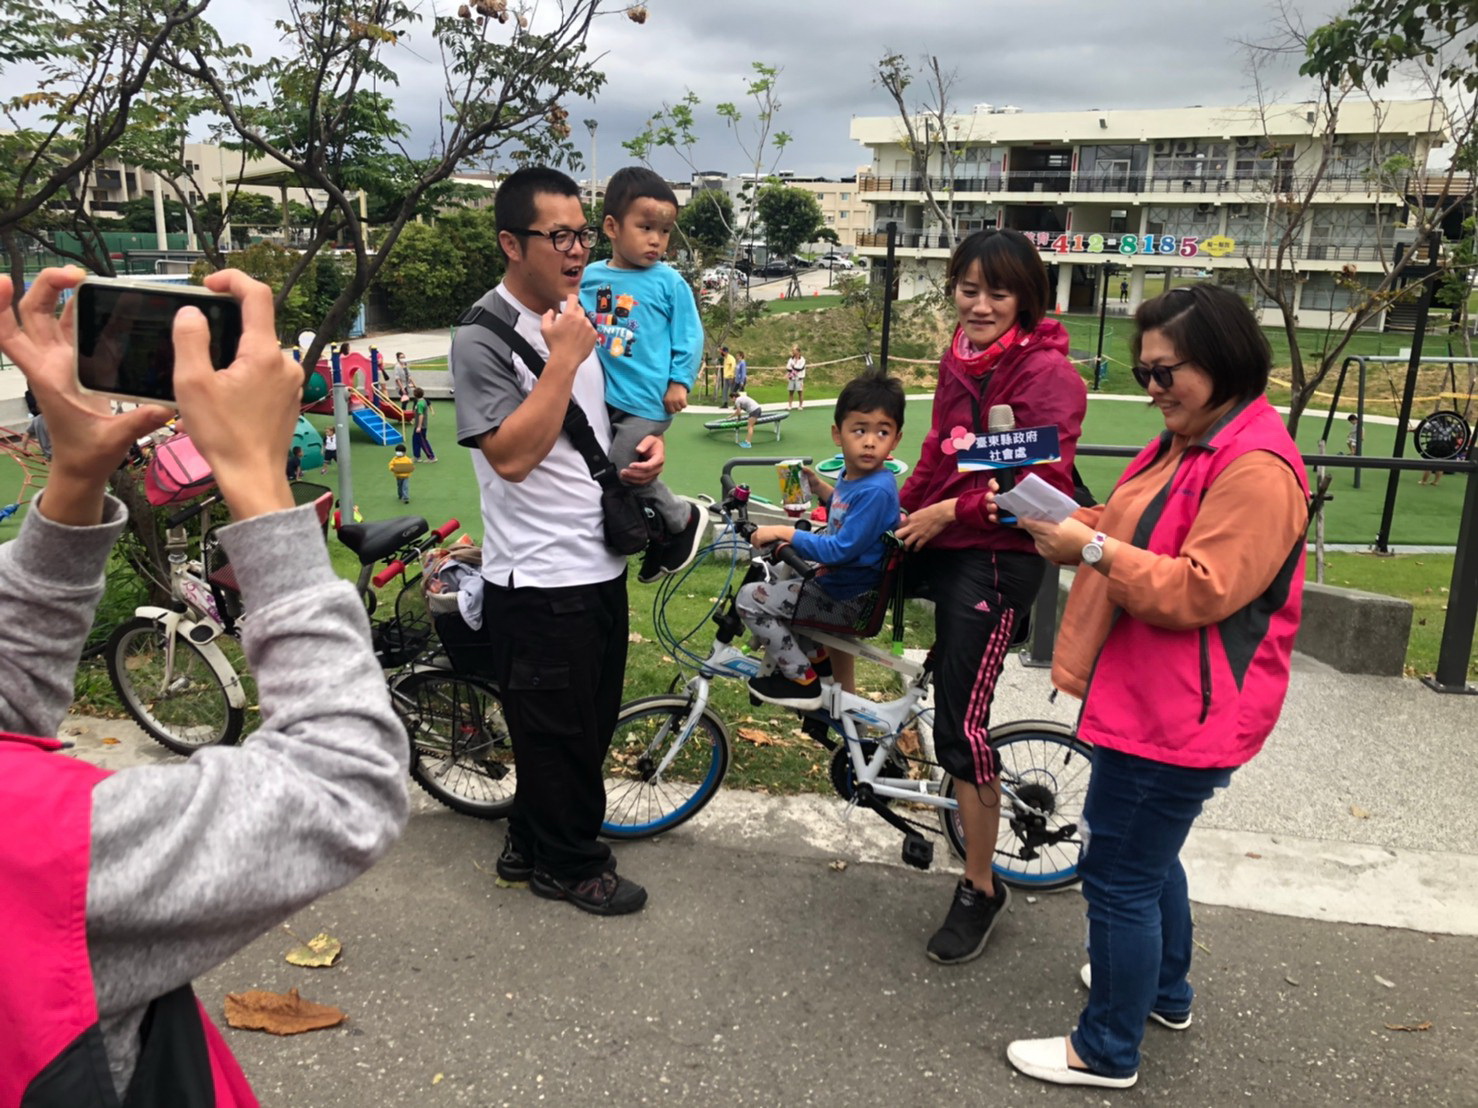 The Department of Social Affairs interviewed 60 passerbys, regardless of age, gender, ethnicity/race, to understand their thoughts about Mother's Day. Source: Taitung County Government